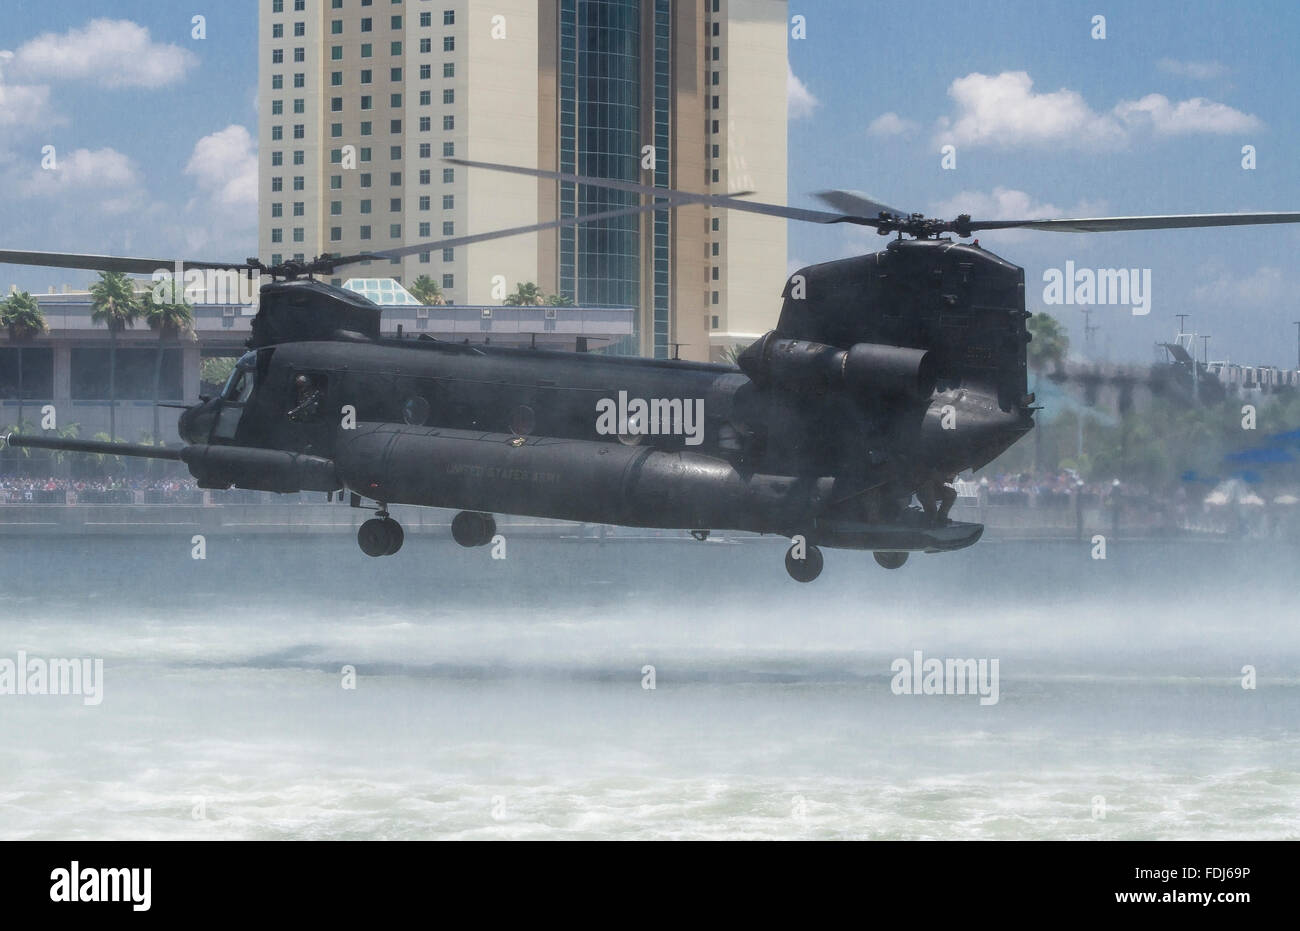 Boeing CH-47 US Army Helicopter operating in front of the Tampa Bay Convention Center during 2012 Special Operation Stock Photo